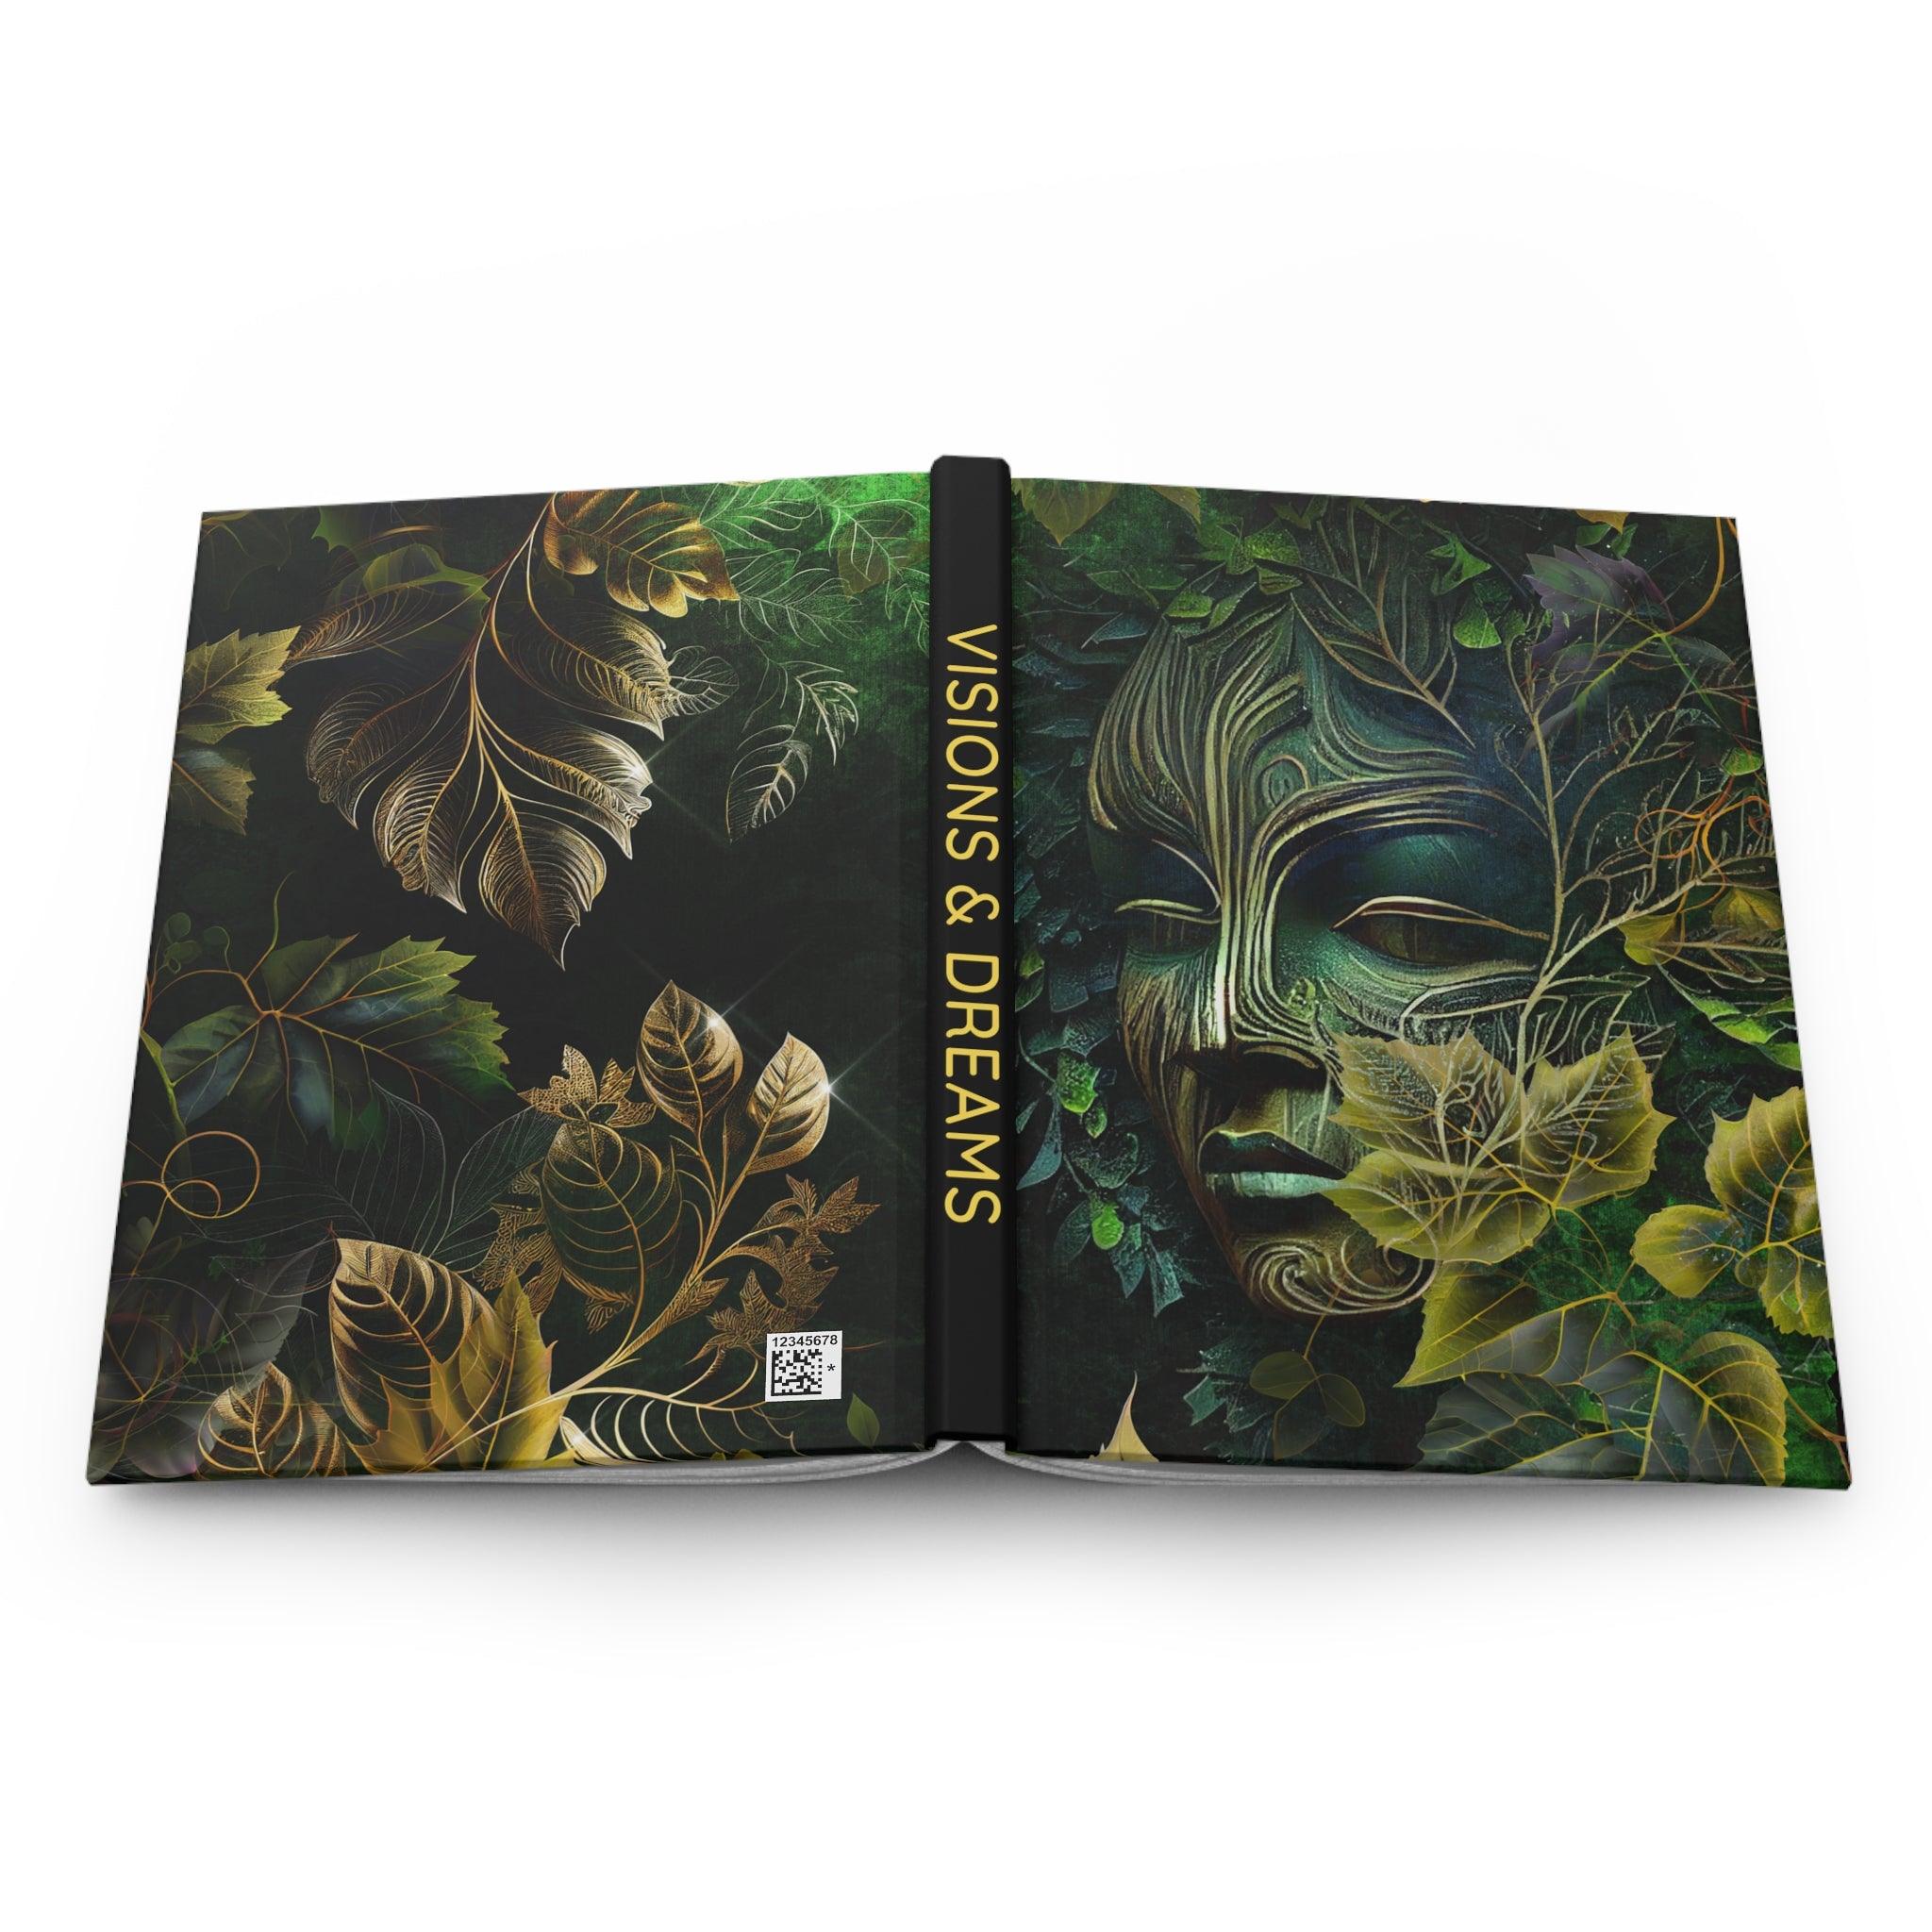 Visions and Dreams Journal, Wood Nymph, Book of Shadows, Matte Hardcover | lovevisionkarma.com